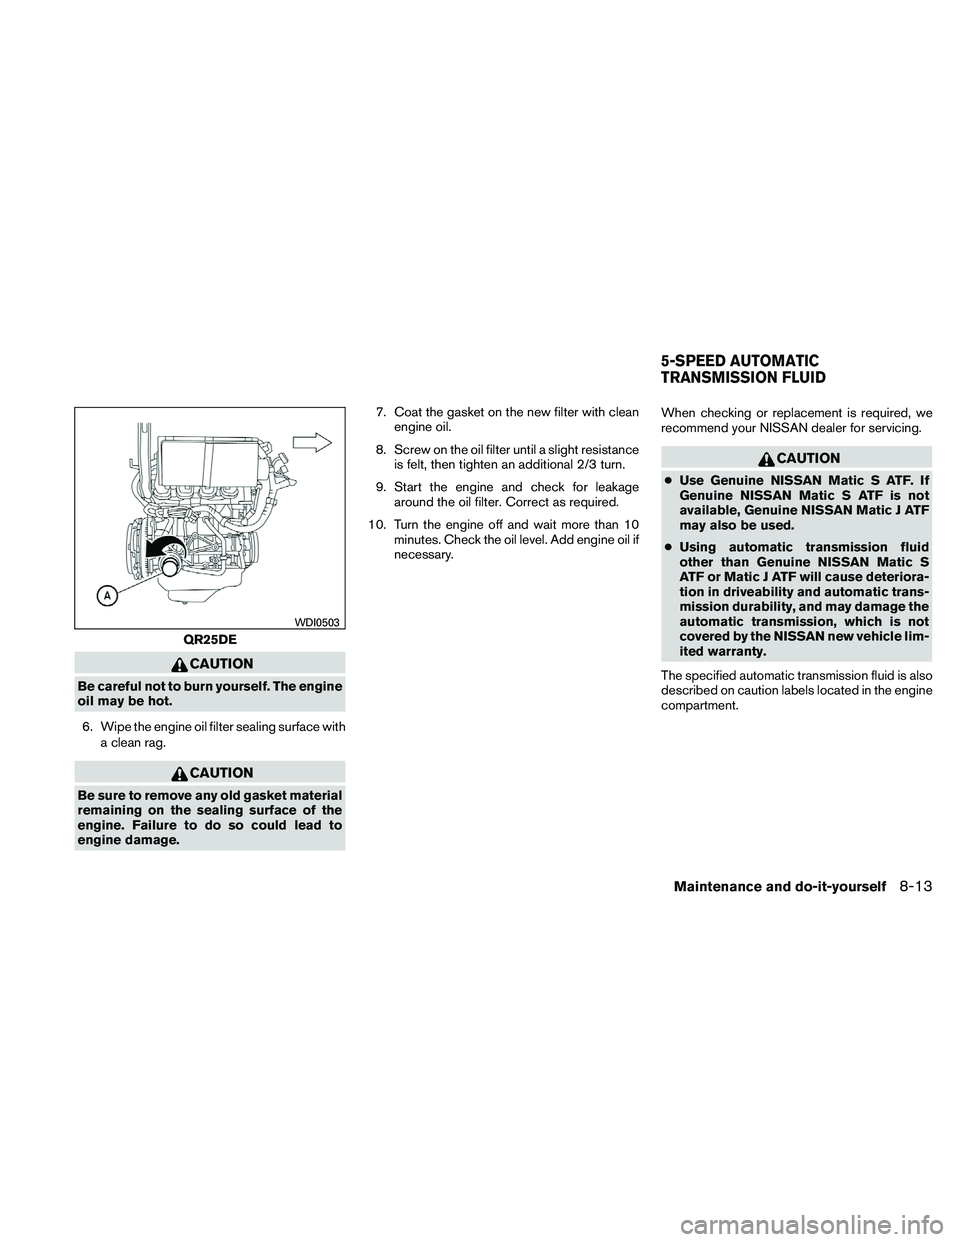 NISSAN FRONTIER 2011  Owner´s Manual CAUTION
Be careful not to burn yourself. The engine
oil may be hot.6. Wipe the engine oil filter sealing surface with a clean rag.
CAUTION
Be sure to remove any old gasket material
remaining on the se